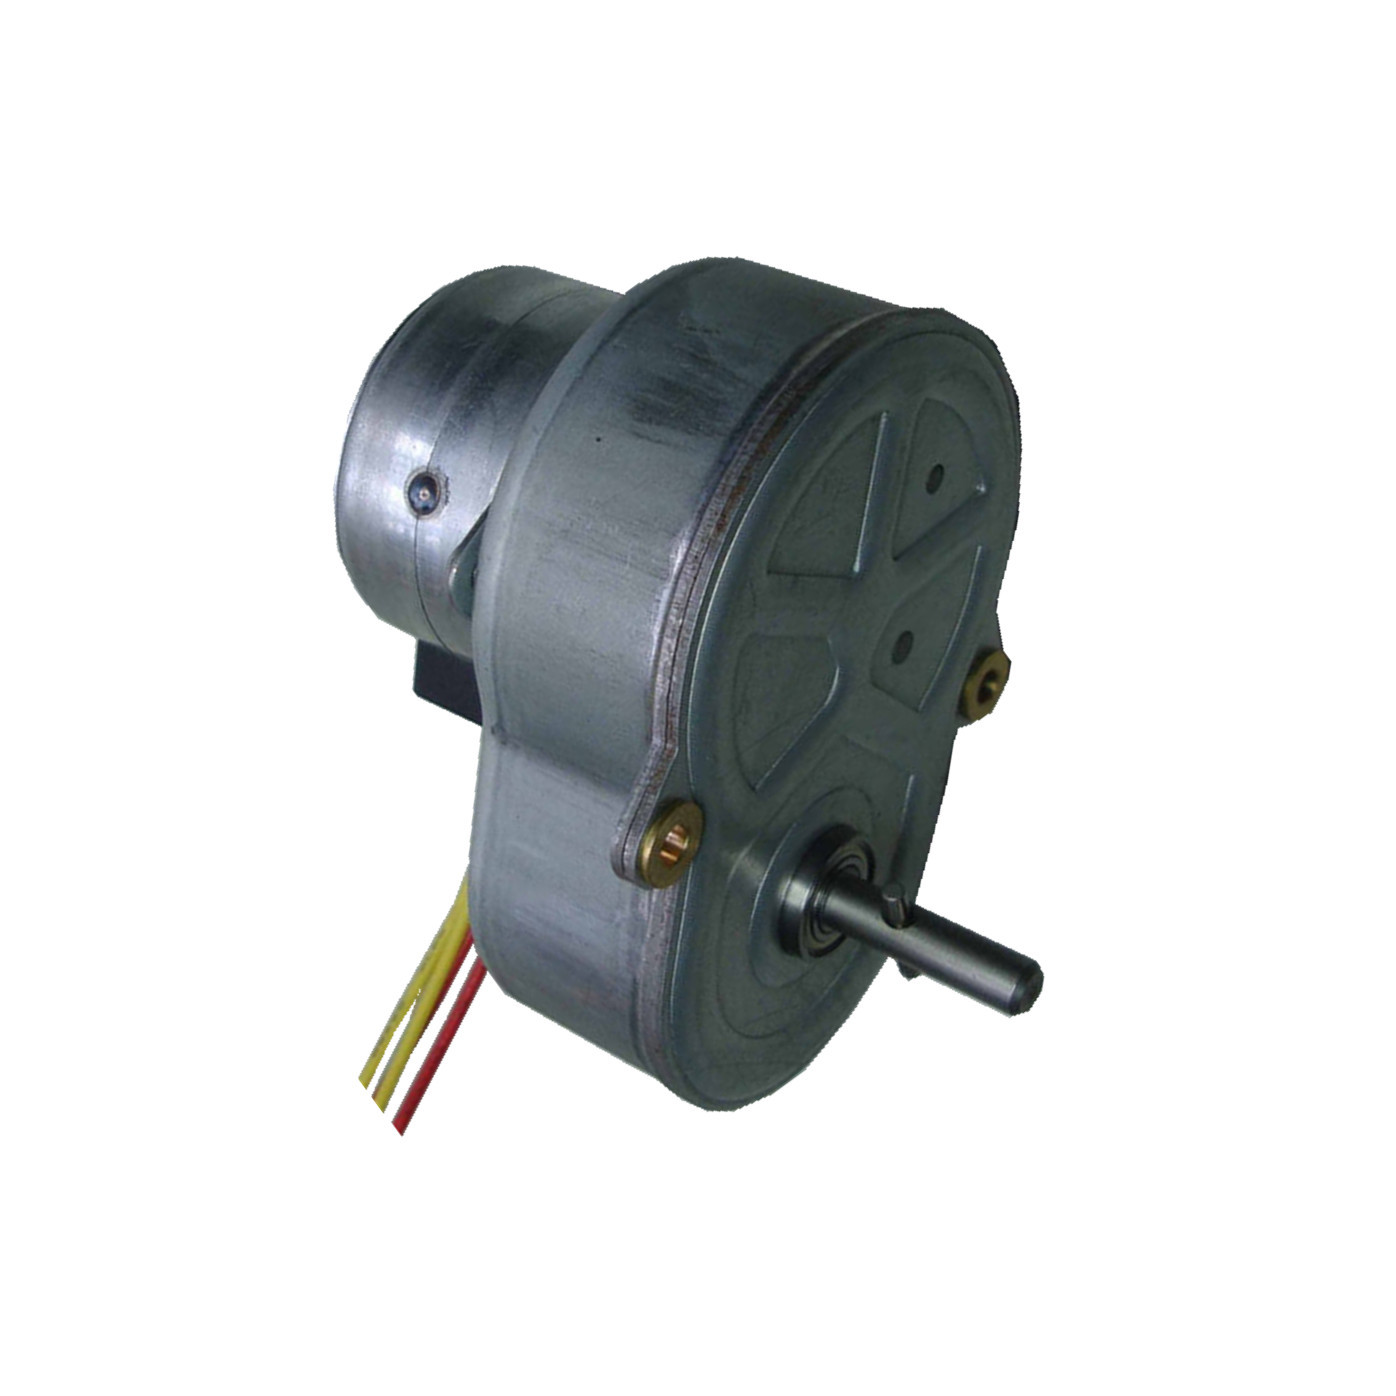  High Efficiency Variable Speed Dc Reduction Gear Motor For Fax Machines / Scanners Manufactures